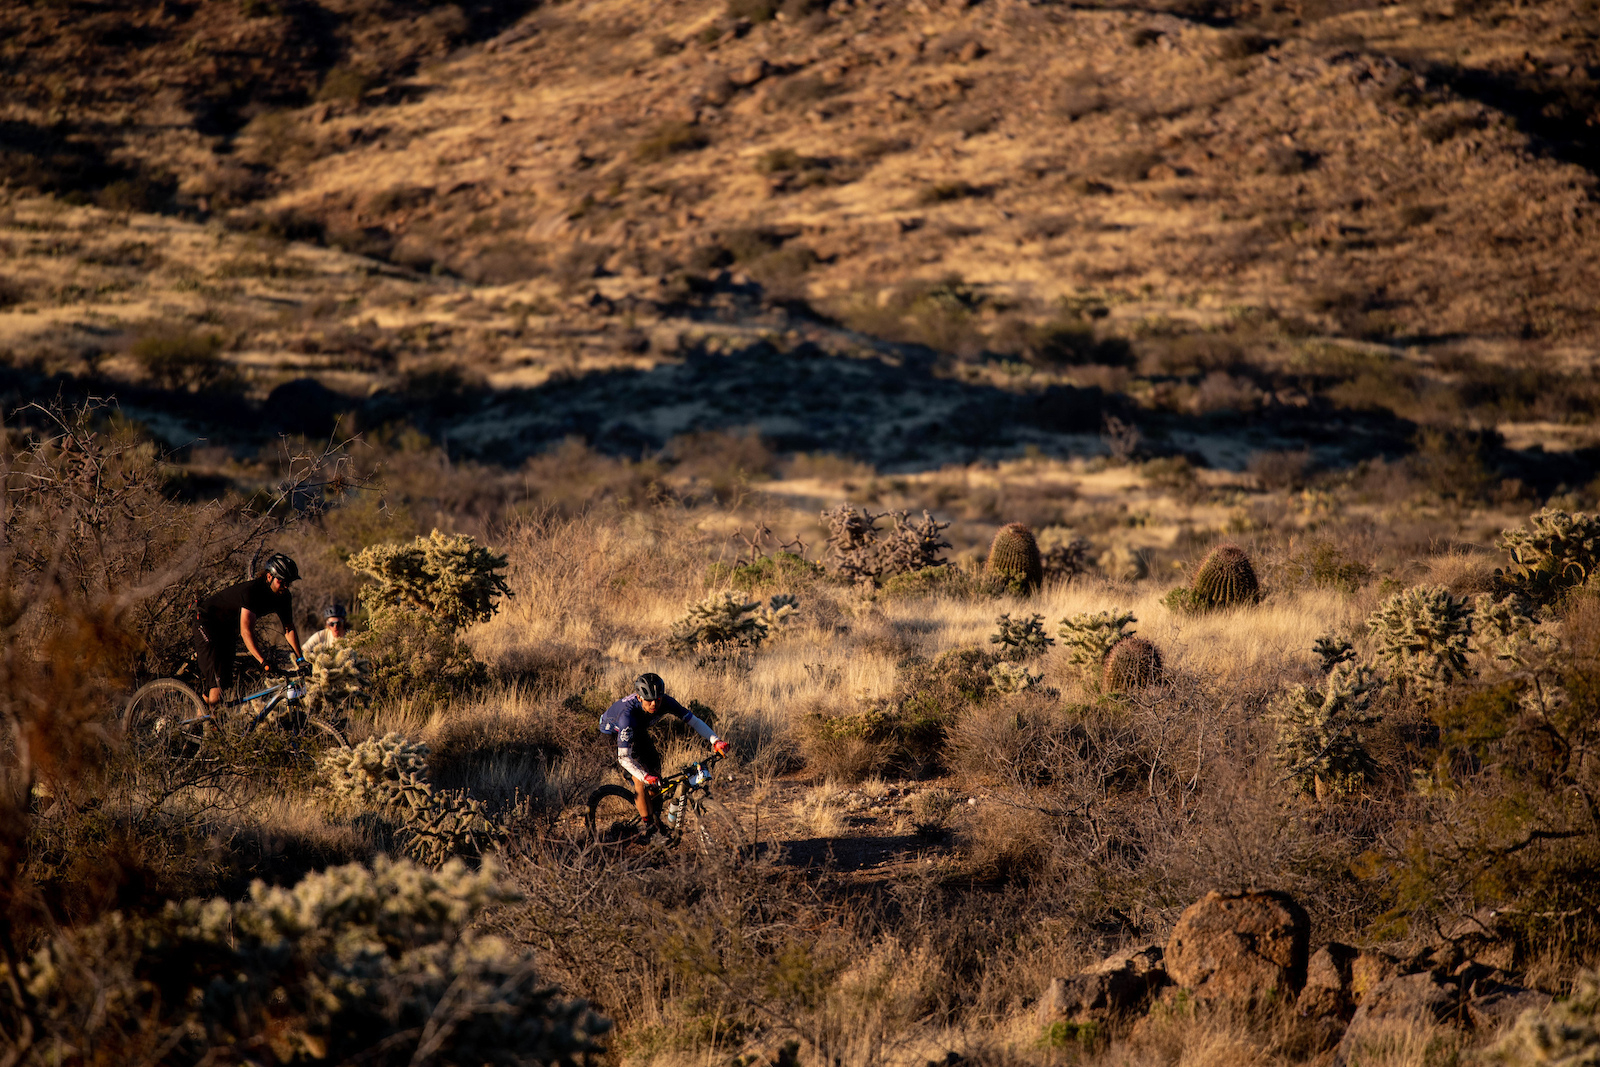 A sea of cactus surrounds racers on Saturday.